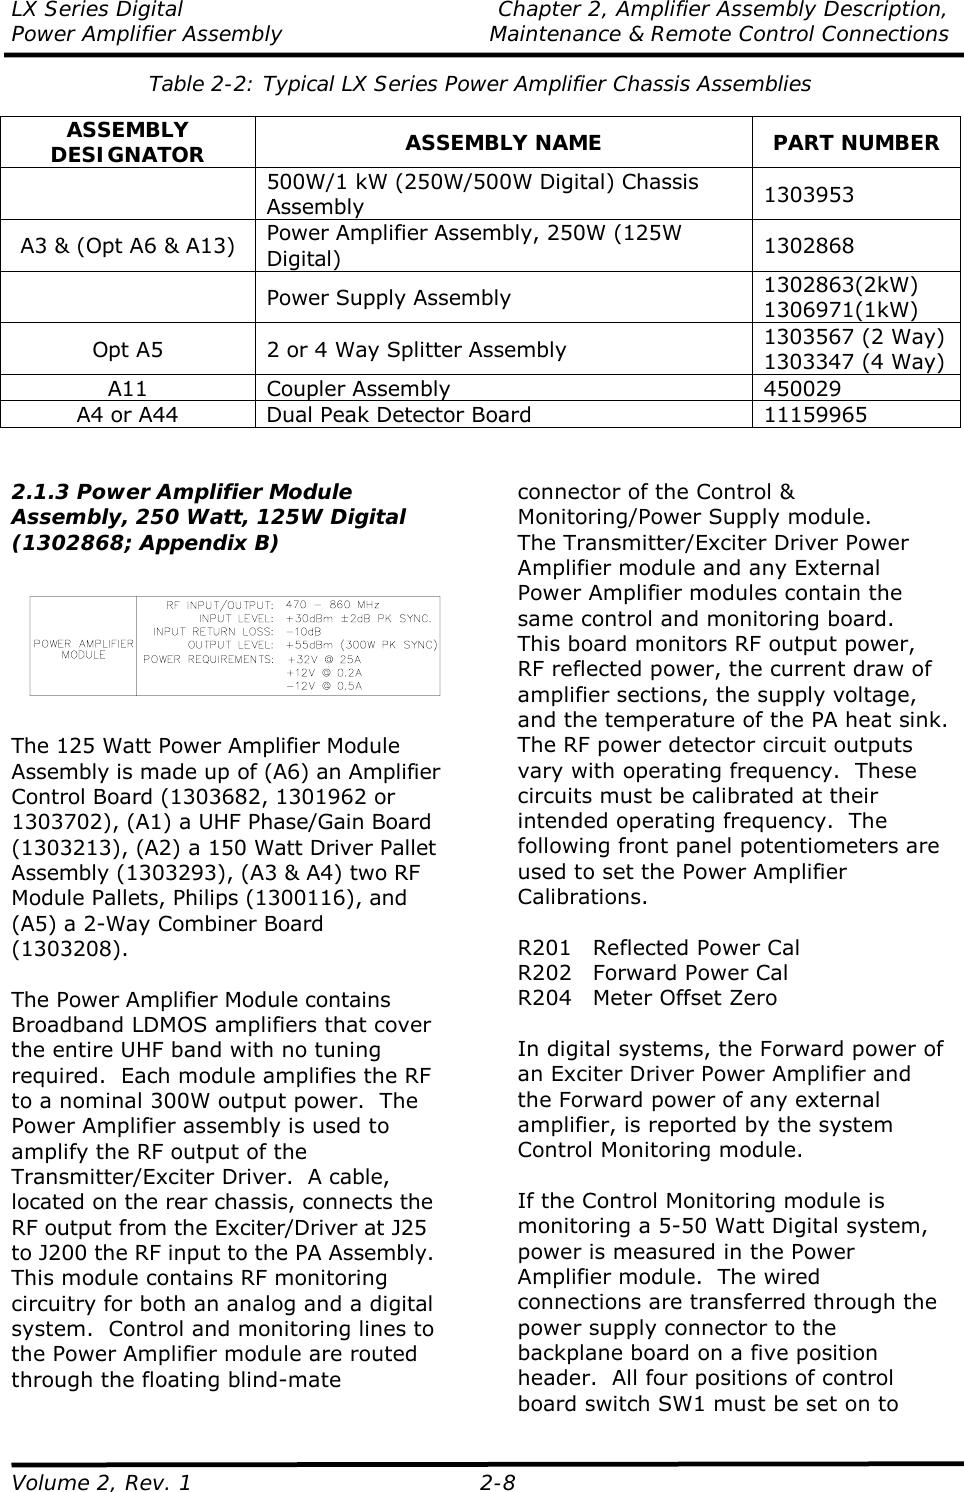 LX Series Digital  Chapter 2, Amplifier Assembly Description, Power Amplifier Assembly   Maintenance &amp; Remote Control Connections Volume 2, Rev. 1  2-8 Table 2-2: Typical LX Series Power Amplifier Chassis Assemblies  ASSEMBLY DESIGNATOR  ASSEMBLY NAME  PART NUMBER  500W/1 kW (250W/500W Digital) Chassis Assembly  1303953 A3 &amp; (Opt A6 &amp; A13)  Power Amplifier Assembly, 250W (125W Digital)  1302868   Power Supply Assembly  1302863(2kW) 1306971(1kW) Opt A5  2 or 4 Way Splitter Assembly  1303567 (2 Way) 1303347 (4 Way) A11 Coupler Assembly  450029 A4 or A44  Dual Peak Detector Board  11159965   2.1.3 Power Amplifier Module Assembly, 250 Watt, 125W Digital (1302868; Appendix B)    The 125 Watt Power Amplifier Module Assembly is made up of (A6) an Amplifier Control Board (1303682, 1301962 or 1303702), (A1) a UHF Phase/Gain Board (1303213), (A2) a 150 Watt Driver Pallet Assembly (1303293), (A3 &amp; A4) two RF Module Pallets, Philips (1300116), and (A5) a 2-Way Combiner Board (1303208).  The Power Amplifier Module contains Broadband LDMOS amplifiers that cover the entire UHF band with no tuning required.  Each module amplifies the RF to a nominal 300W output power.  The Power Amplifier assembly is used to amplify the RF output of the Transmitter/Exciter Driver.  A cable, located on the rear chassis, connects the RF output from the Exciter/Driver at J25 to J200 the RF input to the PA Assembly.  This module contains RF monitoring circuitry for both an analog and a digital system.  Control and monitoring lines to the Power Amplifier module are routed through the floating blind-mate connector of the Control &amp; Monitoring/Power Supply module. The Transmitter/Exciter Driver Power Amplifier module and any External Power Amplifier modules contain the same control and monitoring board.  This board monitors RF output power, RF reflected power, the current draw of amplifier sections, the supply voltage, and the temperature of the PA heat sink.  The RF power detector circuit outputs vary with operating frequency.  These circuits must be calibrated at their intended operating frequency.  The following front panel potentiometers are used to set the Power Amplifier Calibrations.  R201  Reflected Power Cal R202  Forward Power Cal R204 Meter Offset Zero  In digital systems, the Forward power of an Exciter Driver Power Amplifier and the Forward power of any external amplifier, is reported by the system Control Monitoring module.   If the Control Monitoring module is monitoring a 5-50 Watt Digital system, power is measured in the Power Amplifier module.  The wired connections are transferred through the power supply connector to the backplane board on a five position header.  All four positions of control board switch SW1 must be set on to 